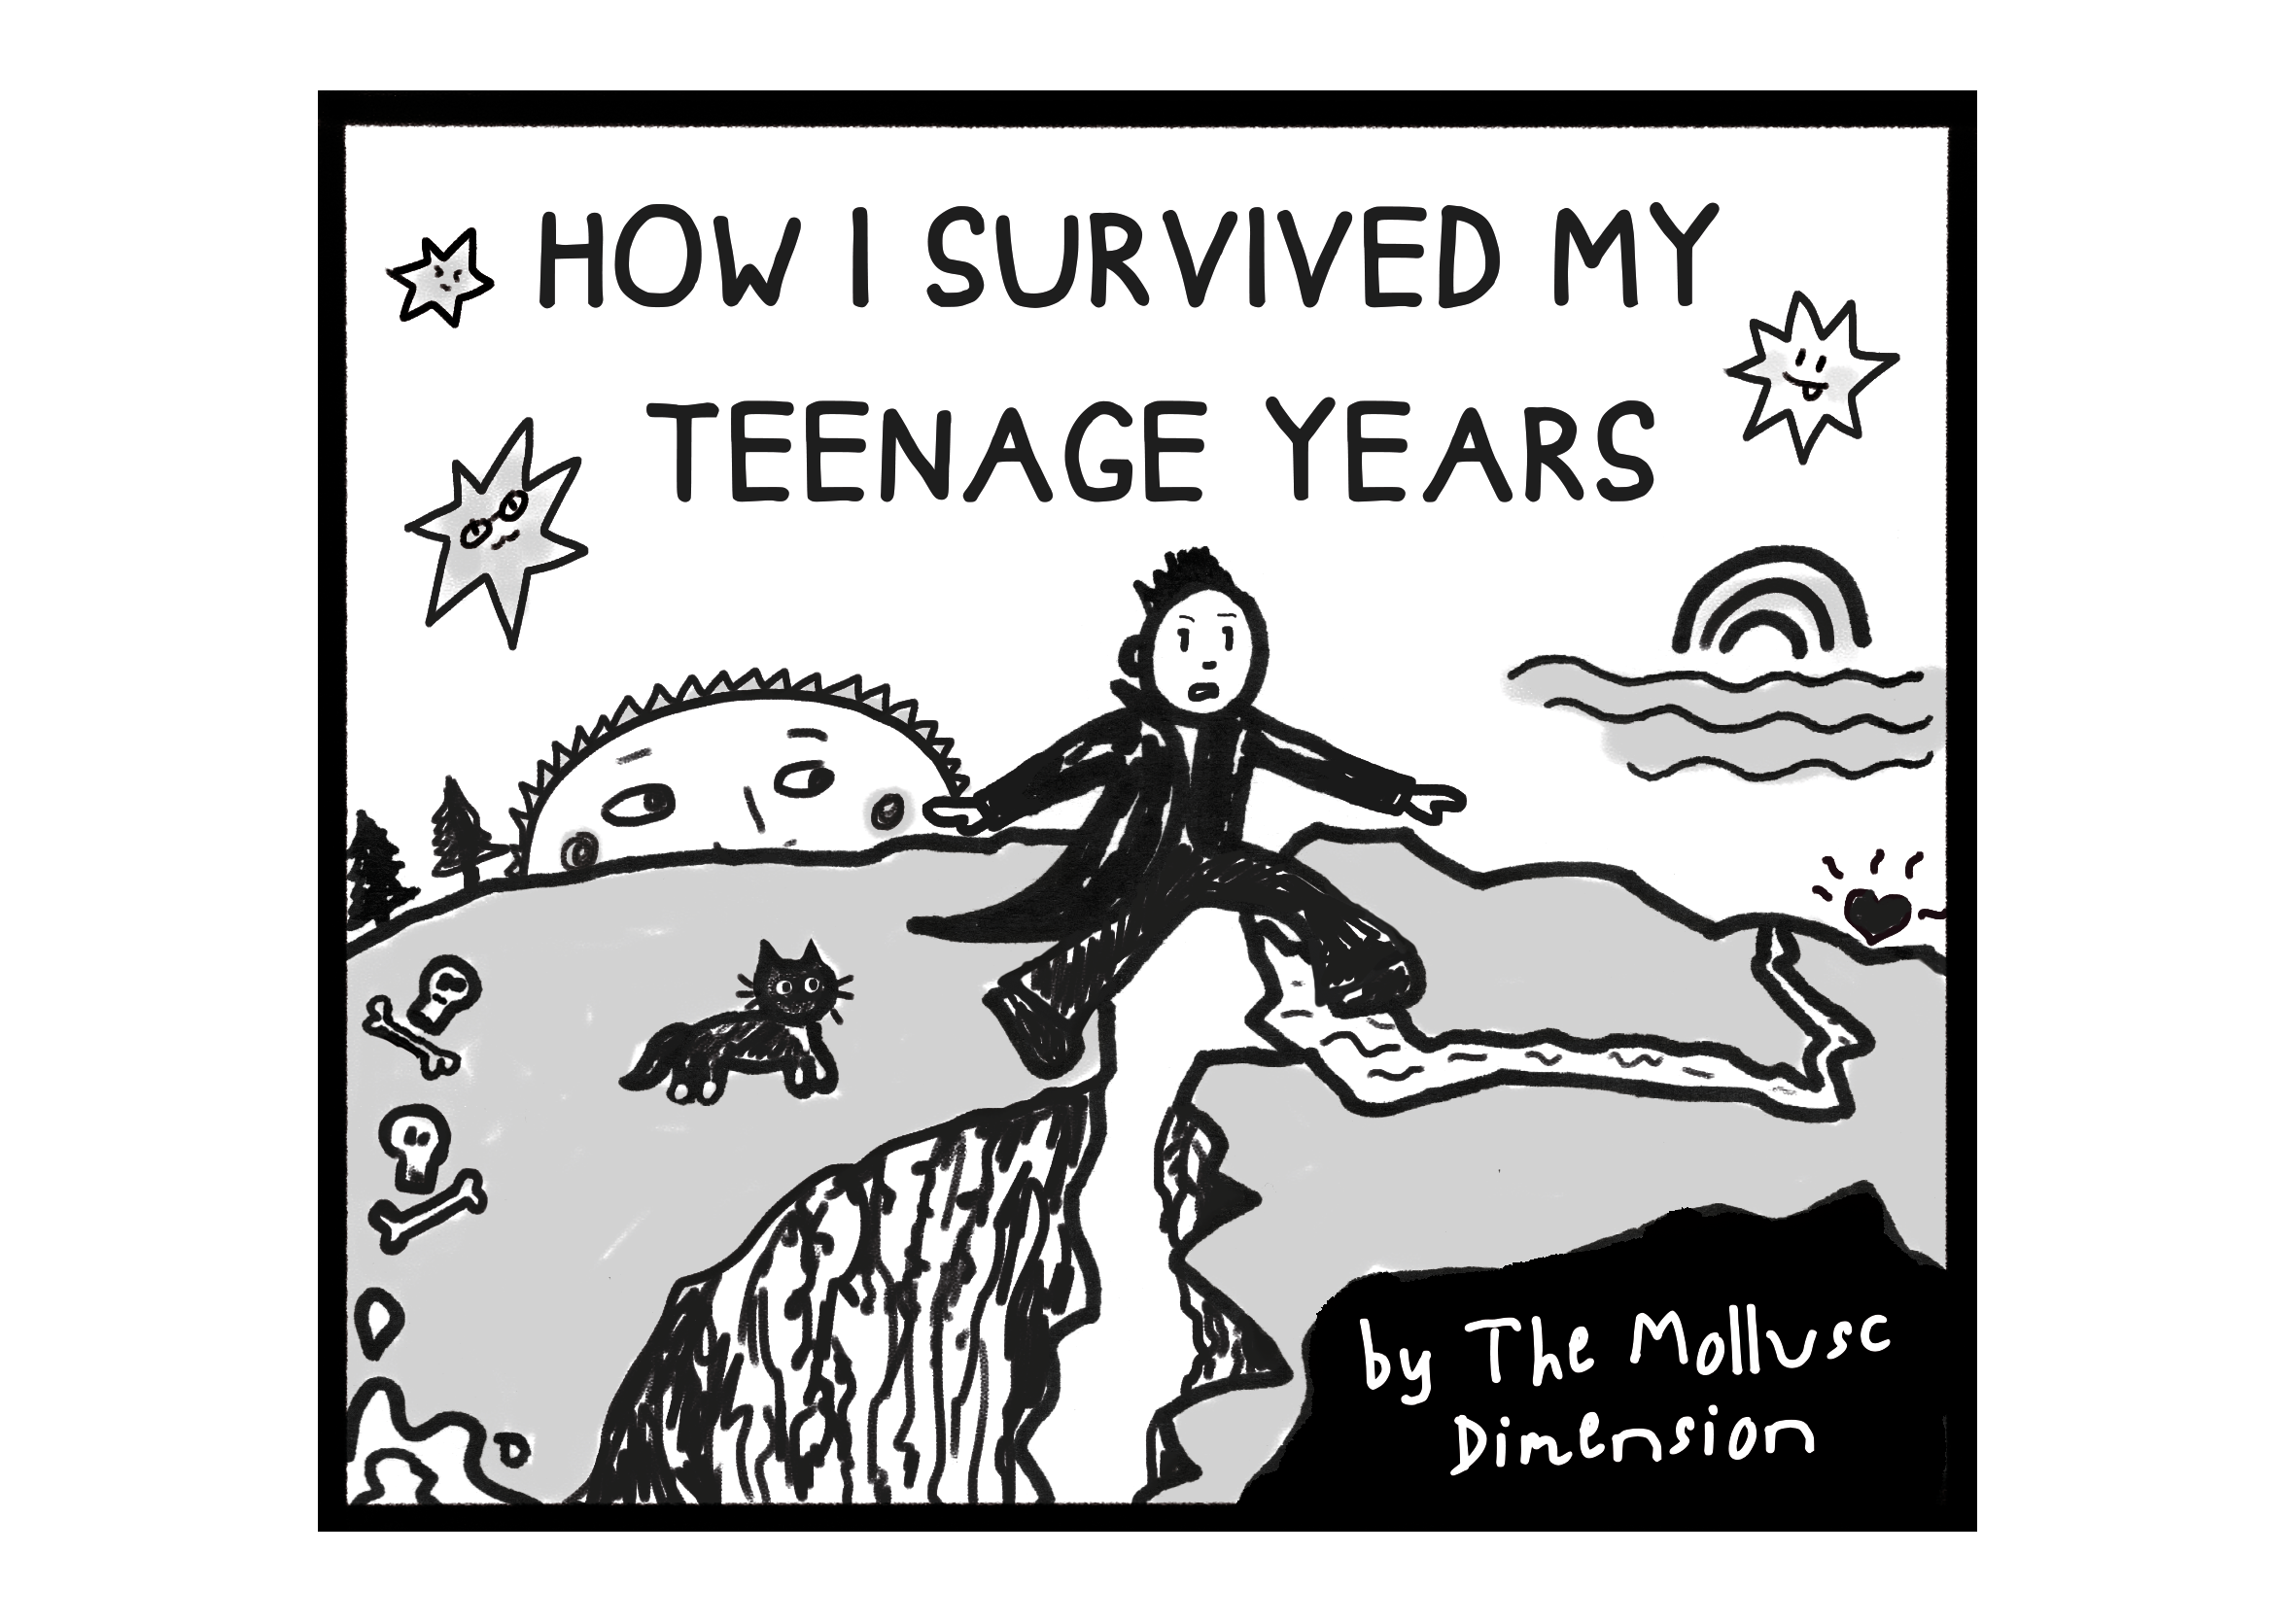 How I survived my teenage years